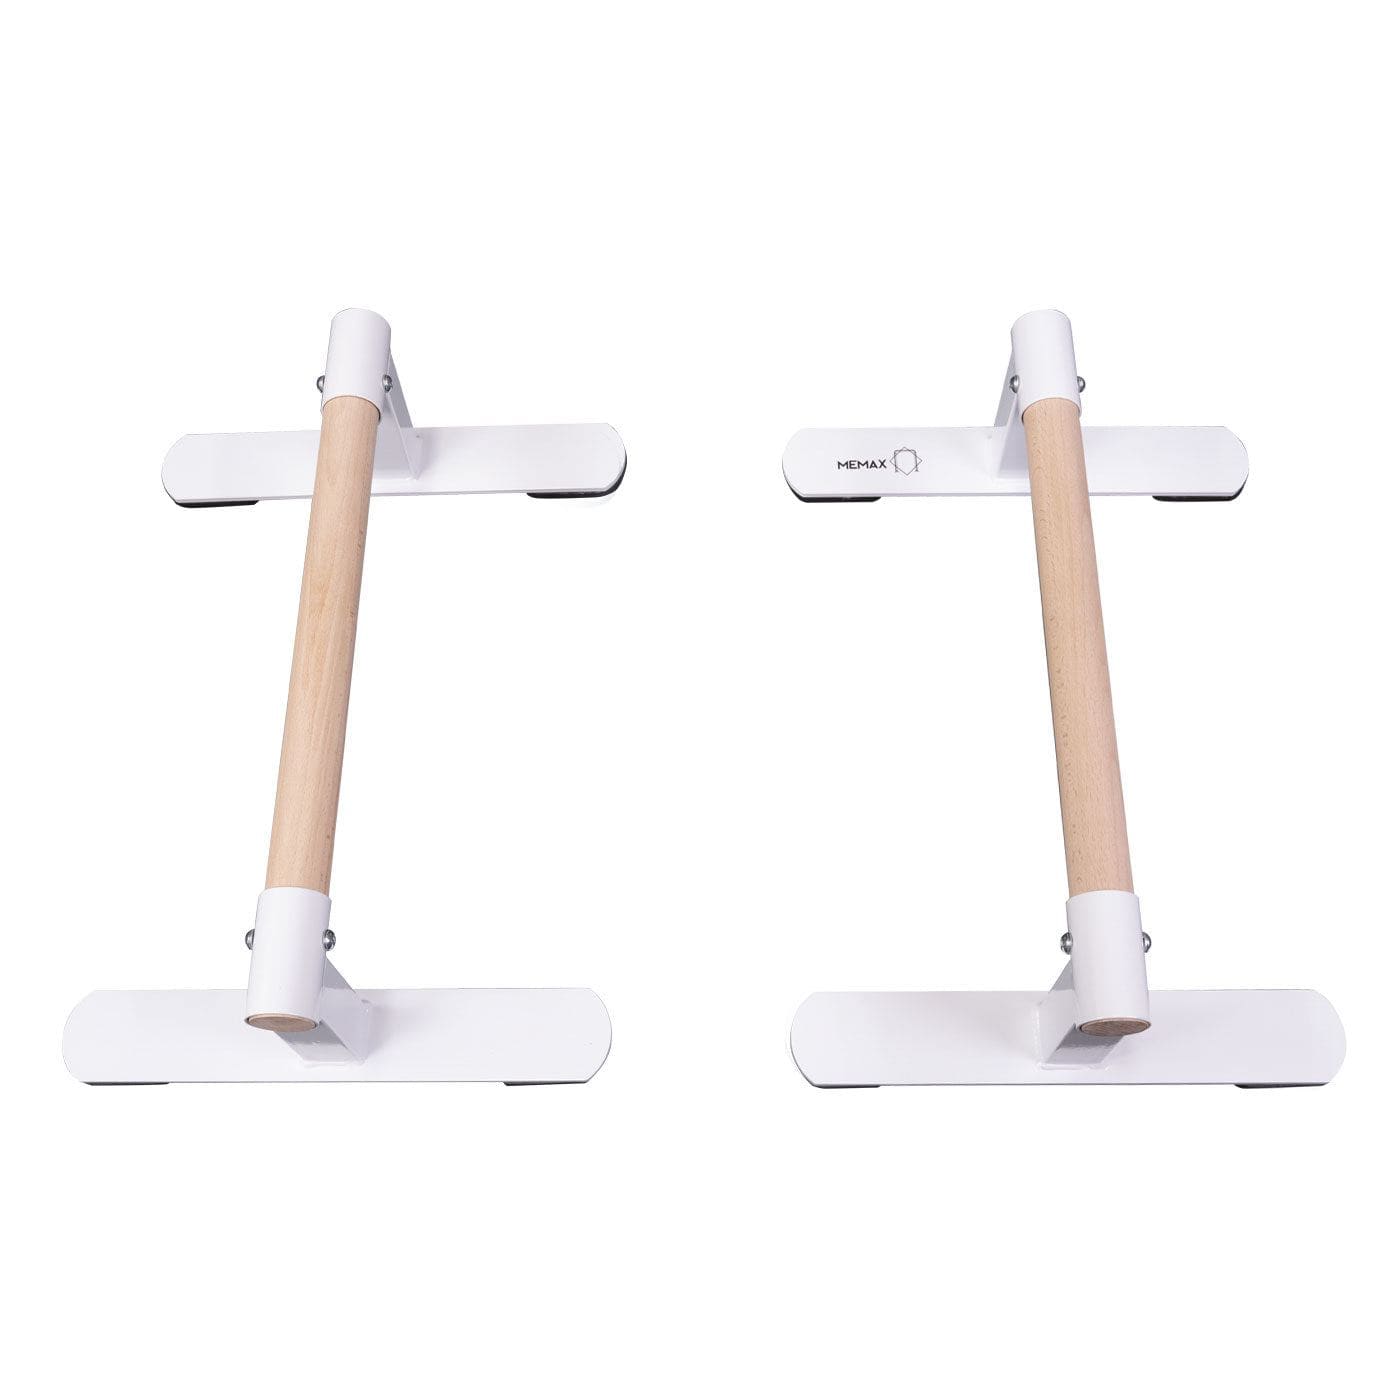 MEMAX Parallette Bars Push-up Stand Gymnastic Handstand Bars